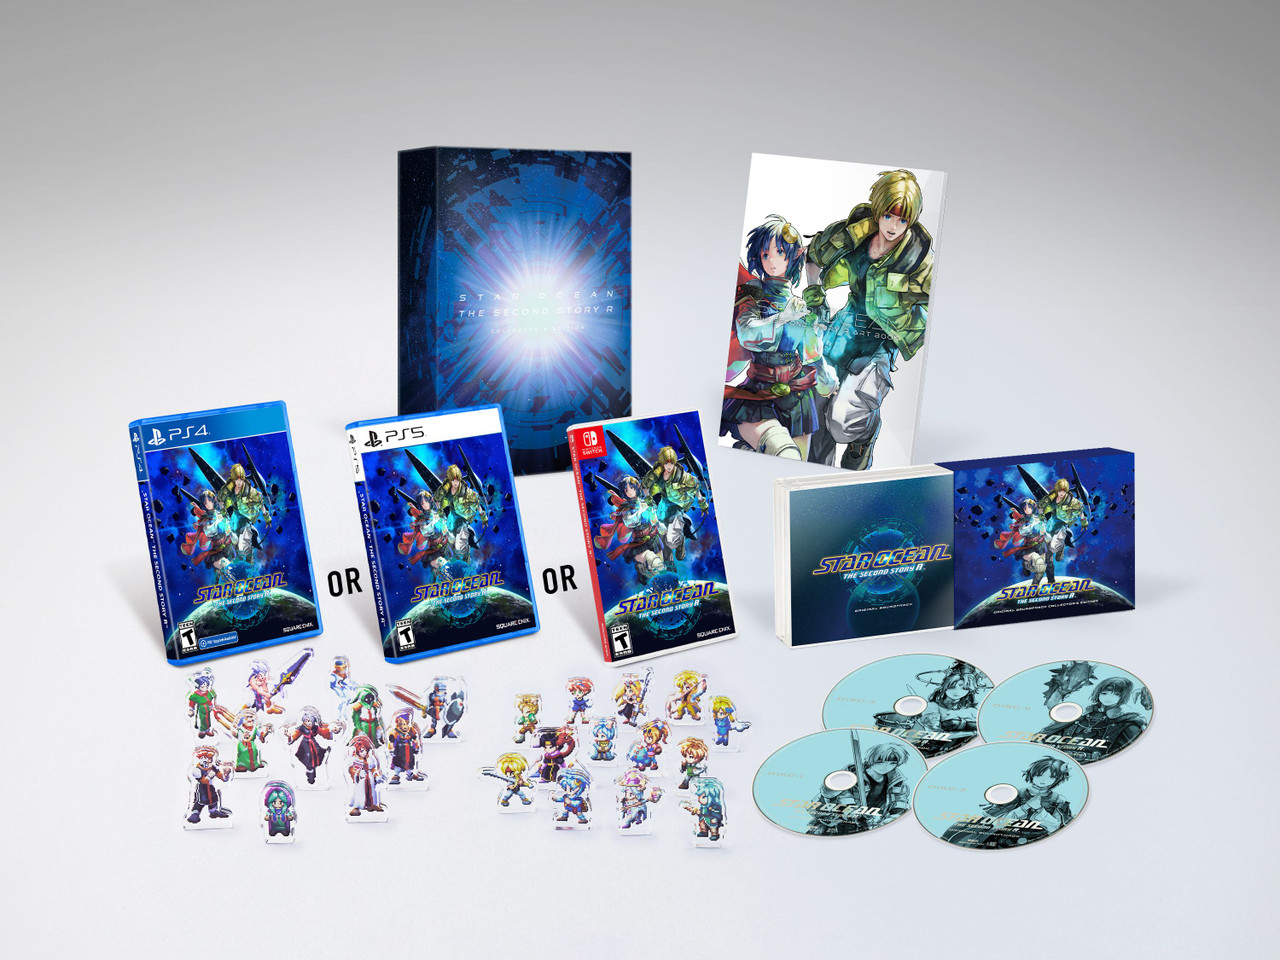 STAR OCEAN THE SECOND STORY R | SQUARE ENIX Store